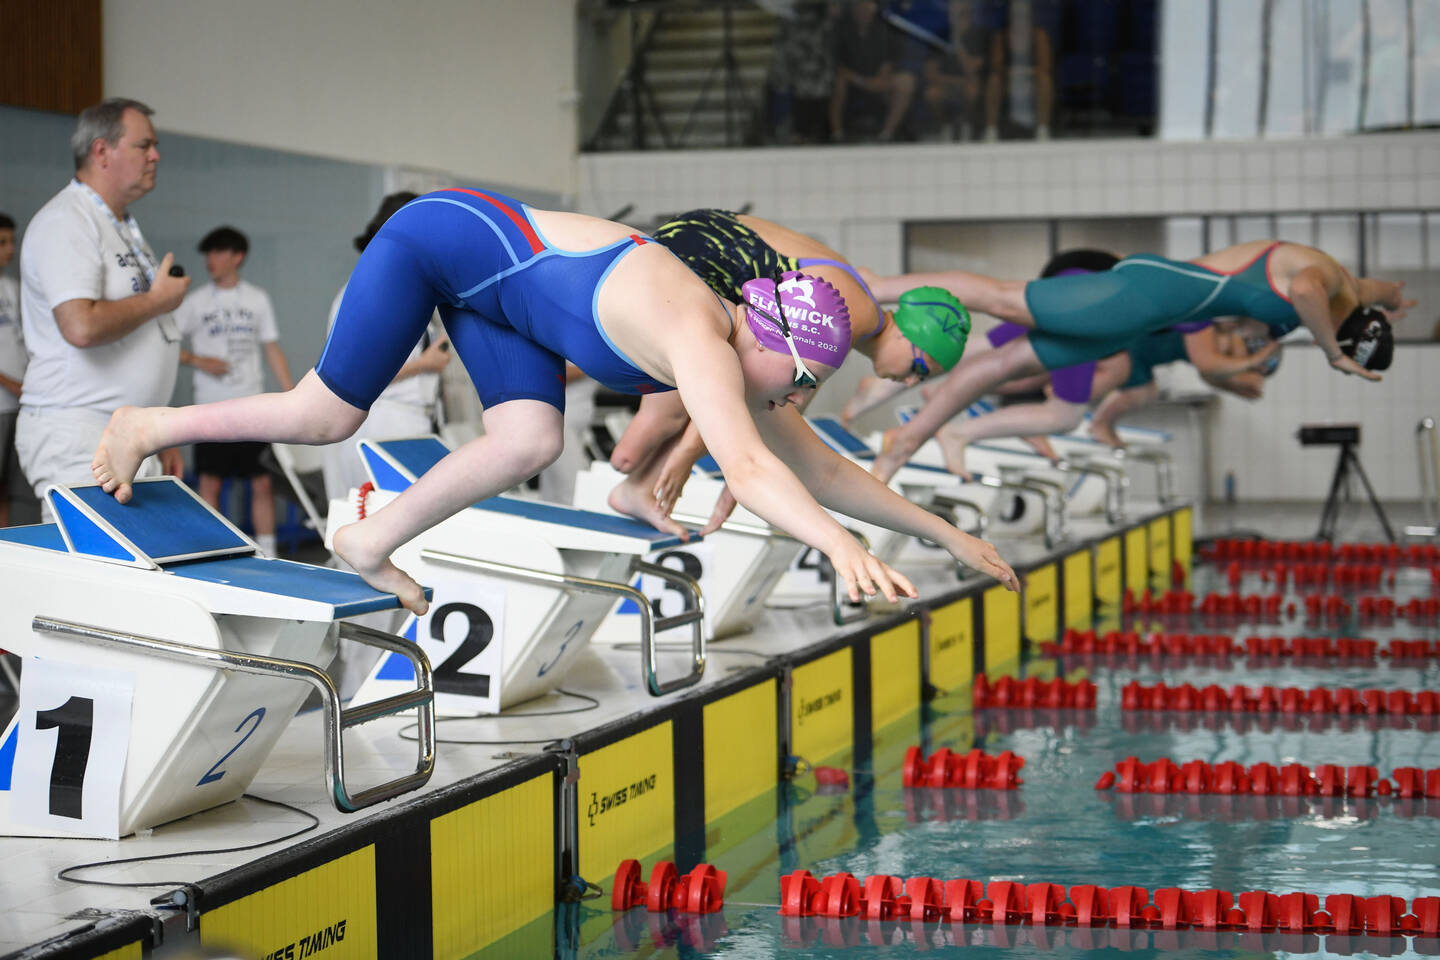 Swimmers dive into a pool off starting blocks. 